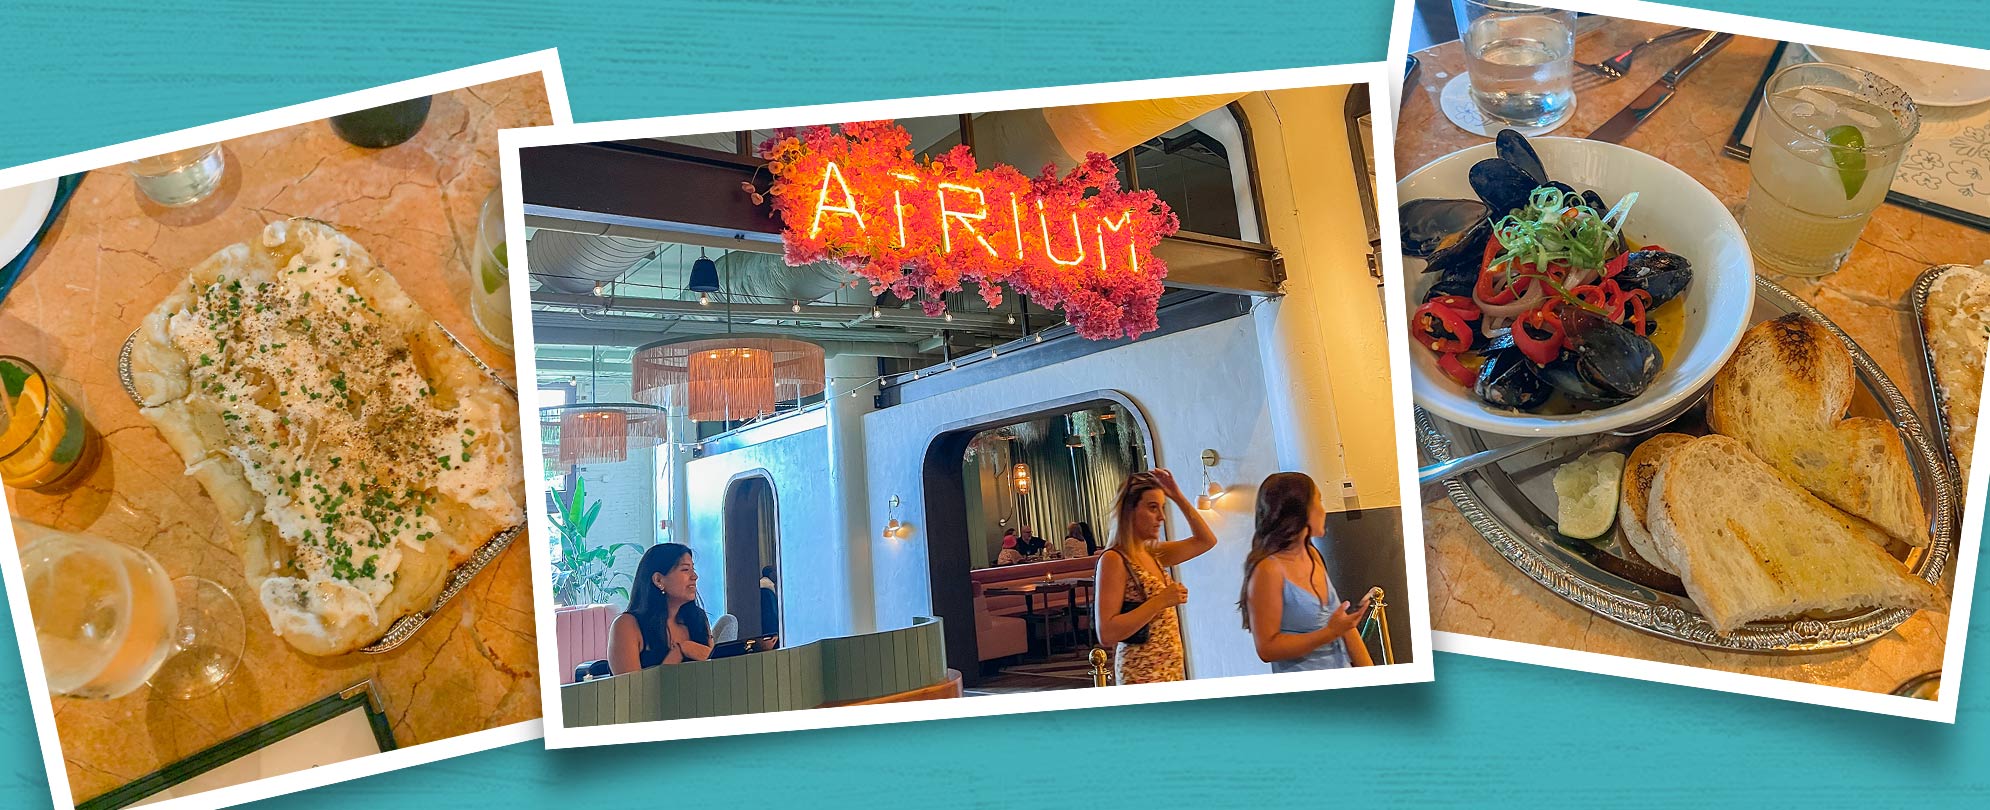 Three snapshots on a teal background showing a goat cheese flatbread dish, two women walking beneath the Atrium restuarant sign, a plate of mussels and grilled bread.